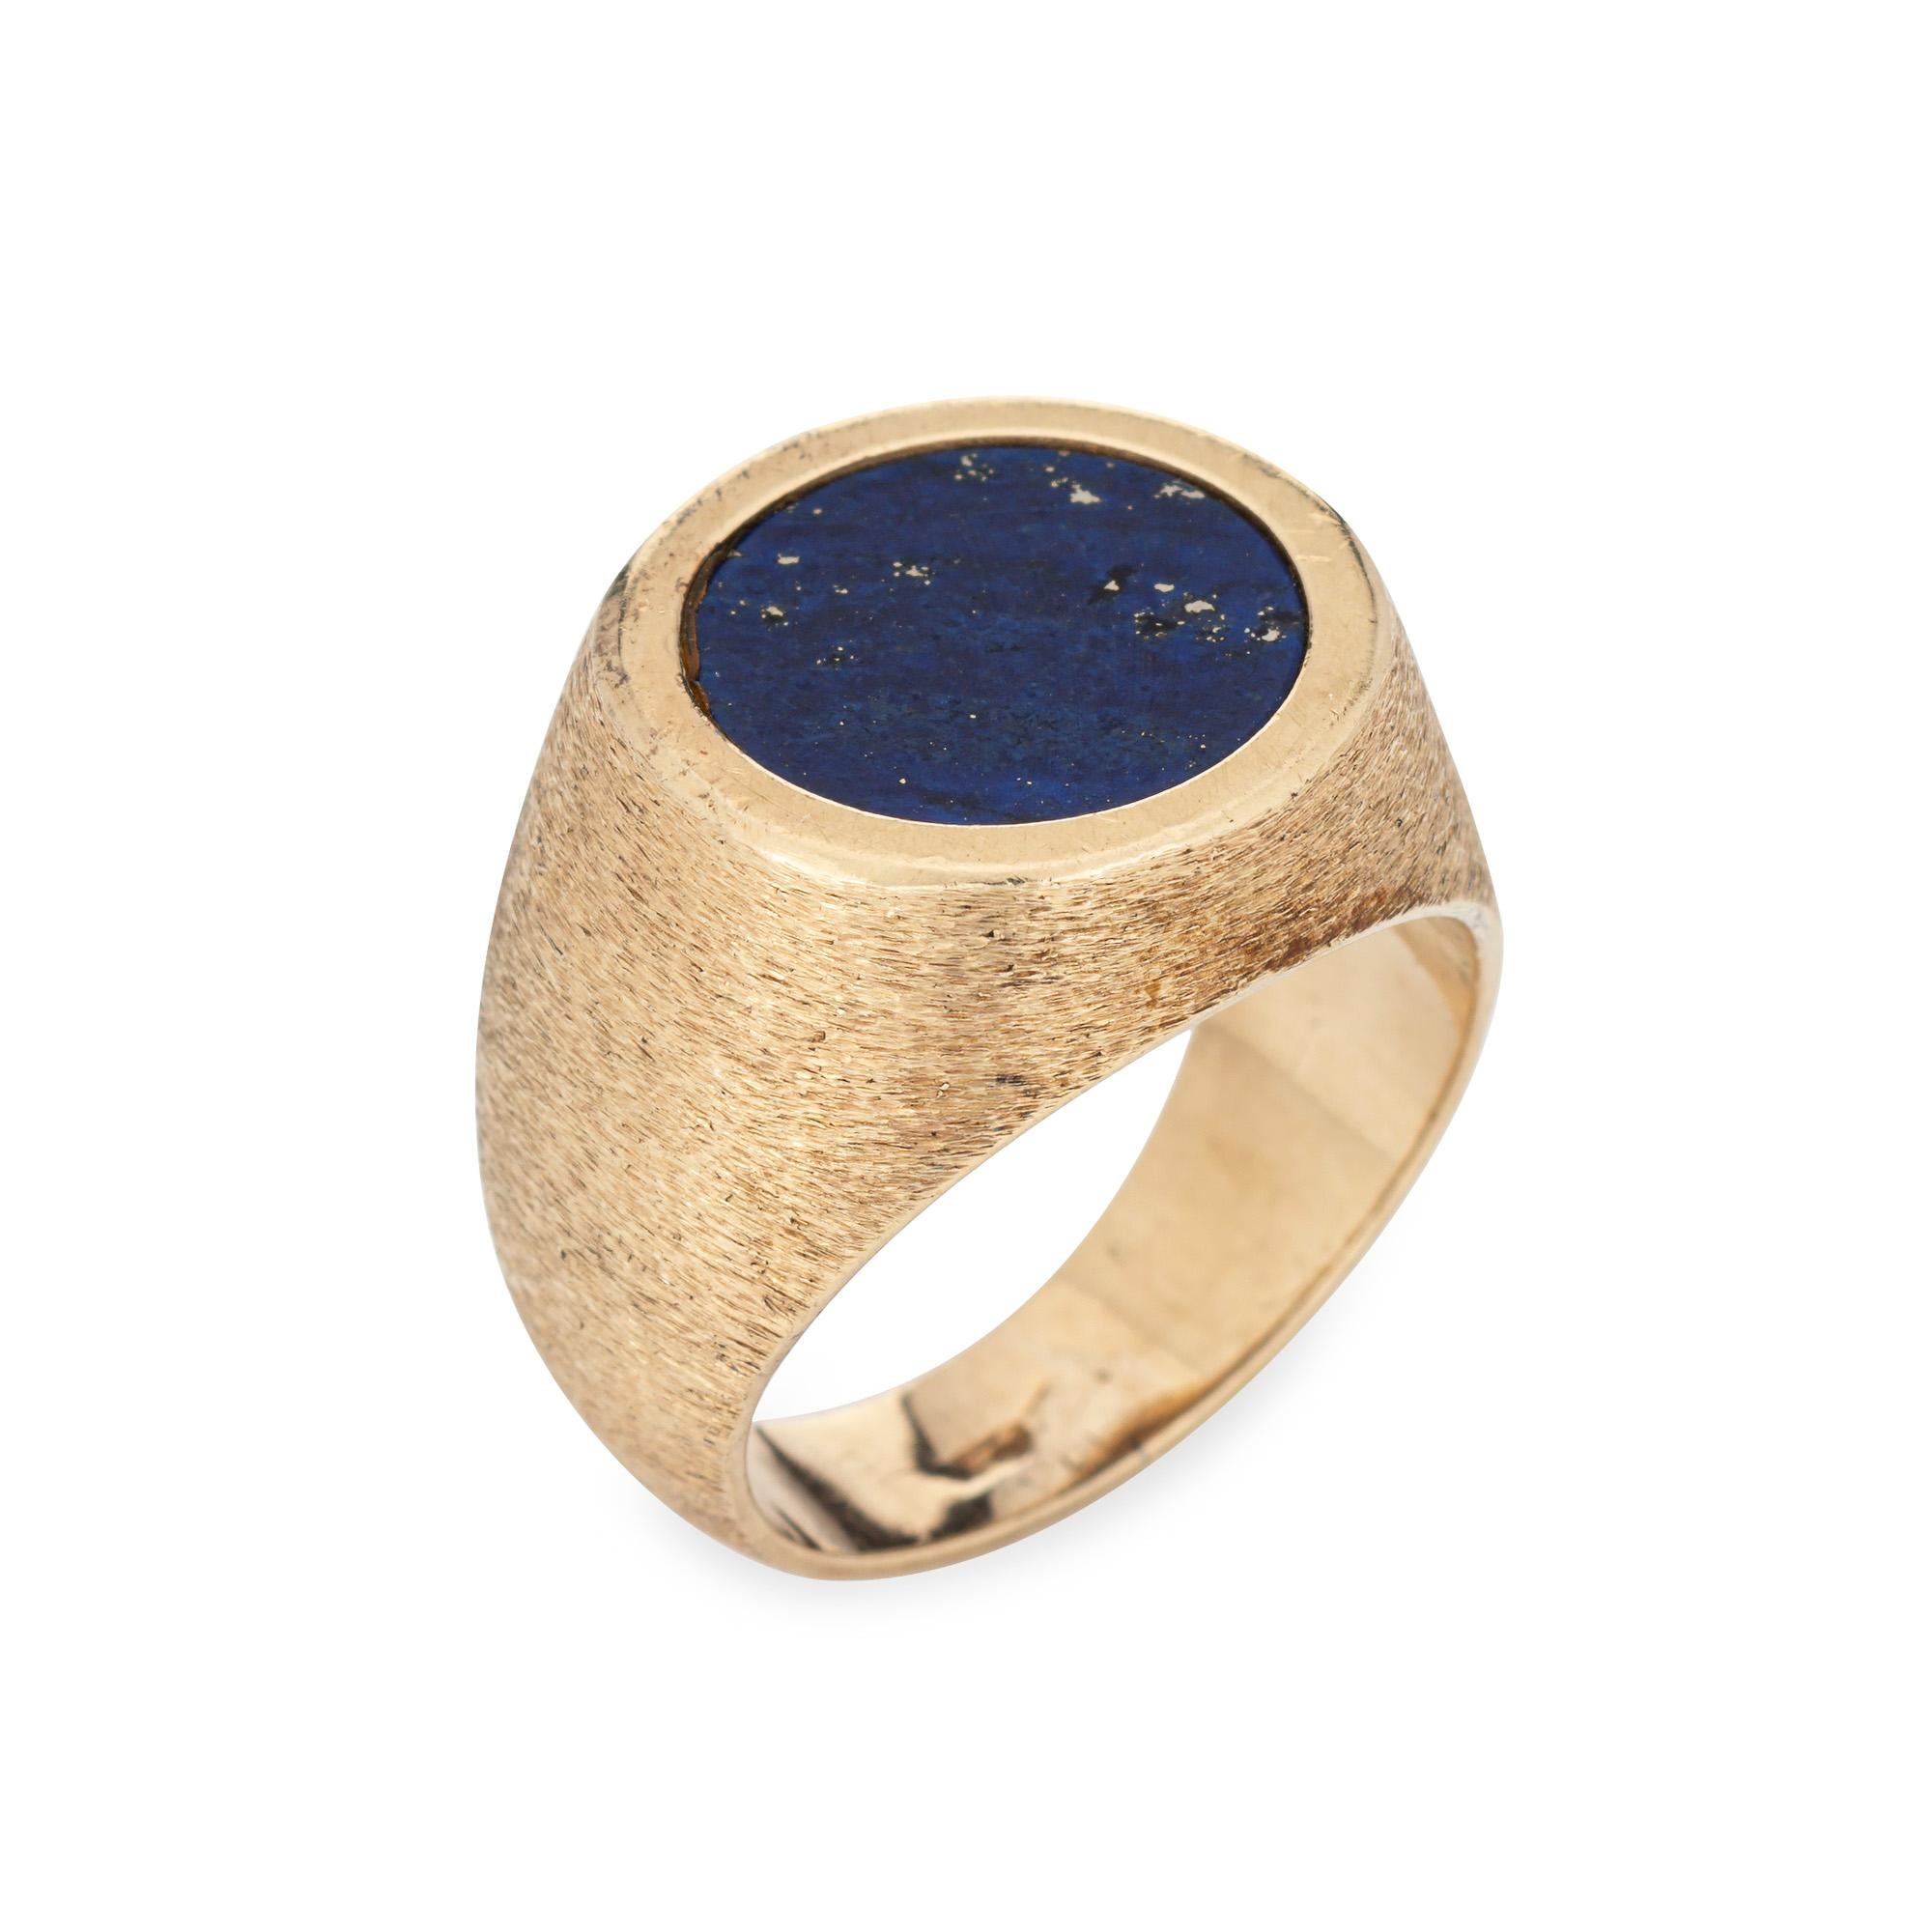 Stylish and finely detailed lapis lazuli signet ring crafted in 14 karat yellow gold (circa 1970s).

Lapis lazuli measures 11mm diameter and is set flush into the mount. The lapis is in very good condition and free of cracks or chips.

The cobalt